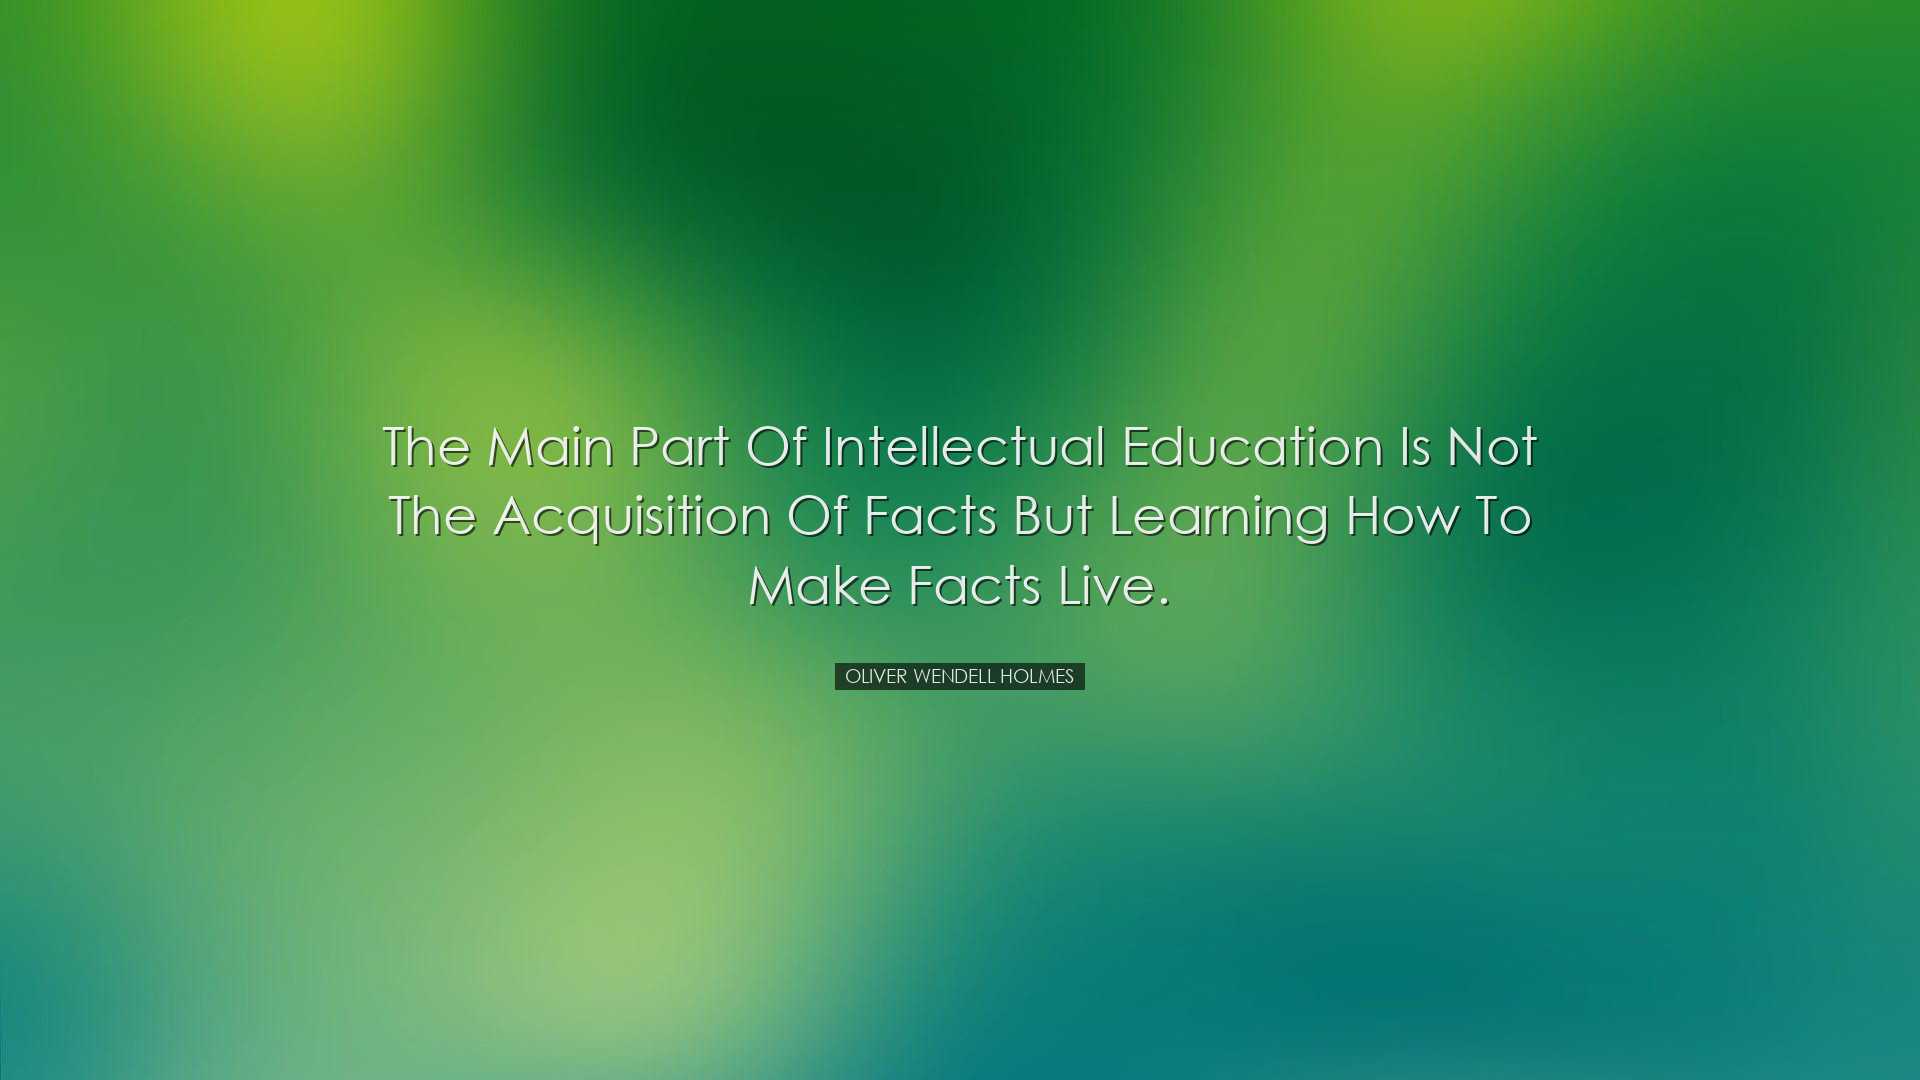 The main part of intellectual education is not the acquisition of